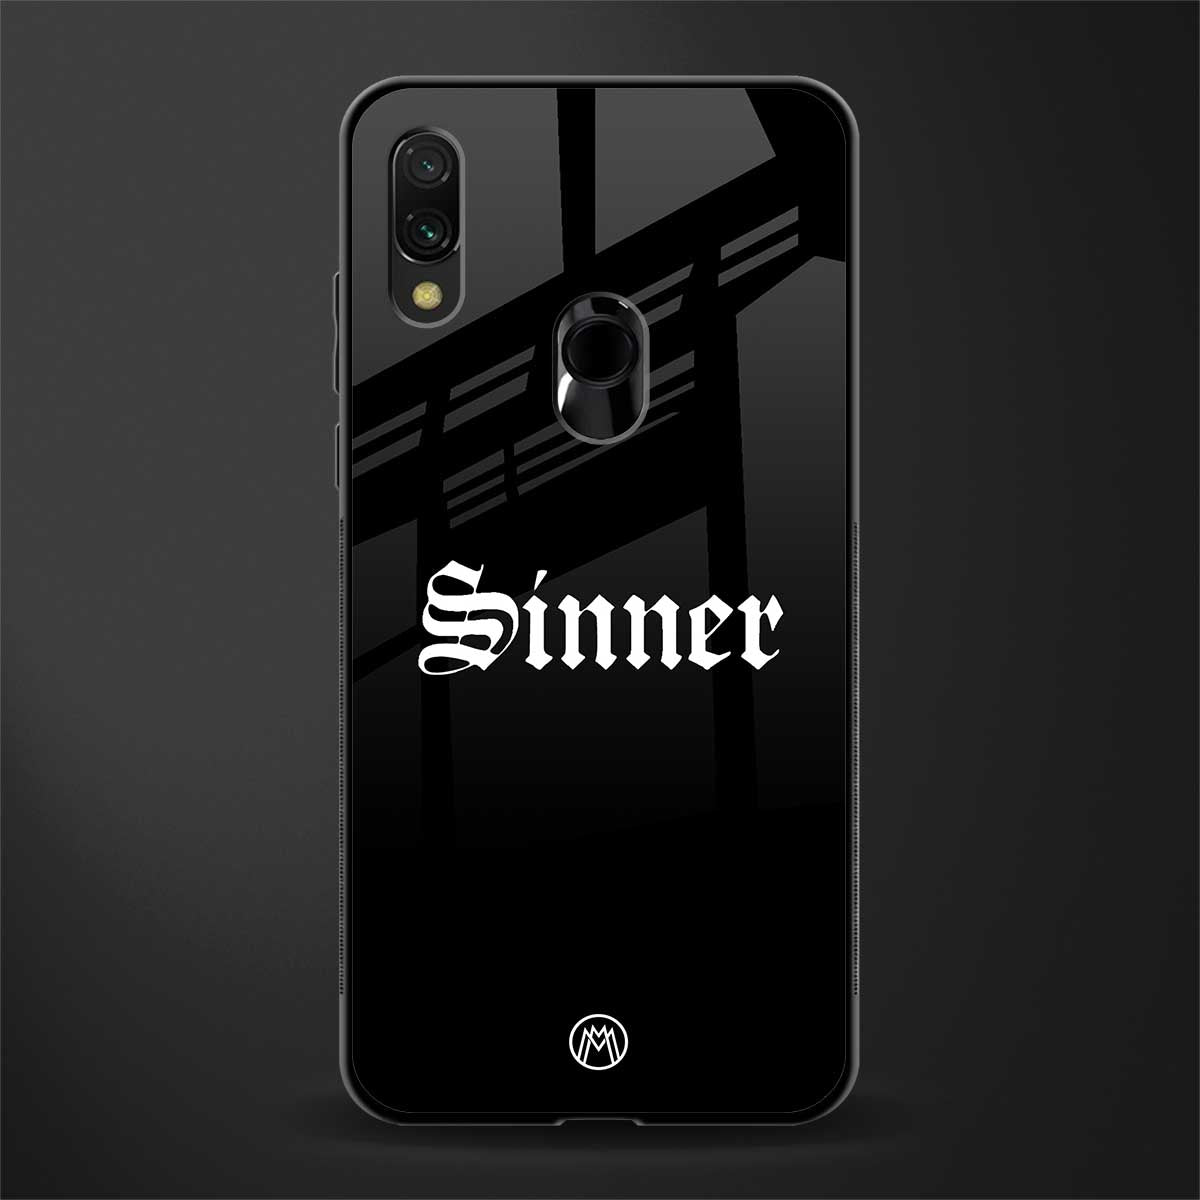 sinner glass case for redmi note 7 pro image